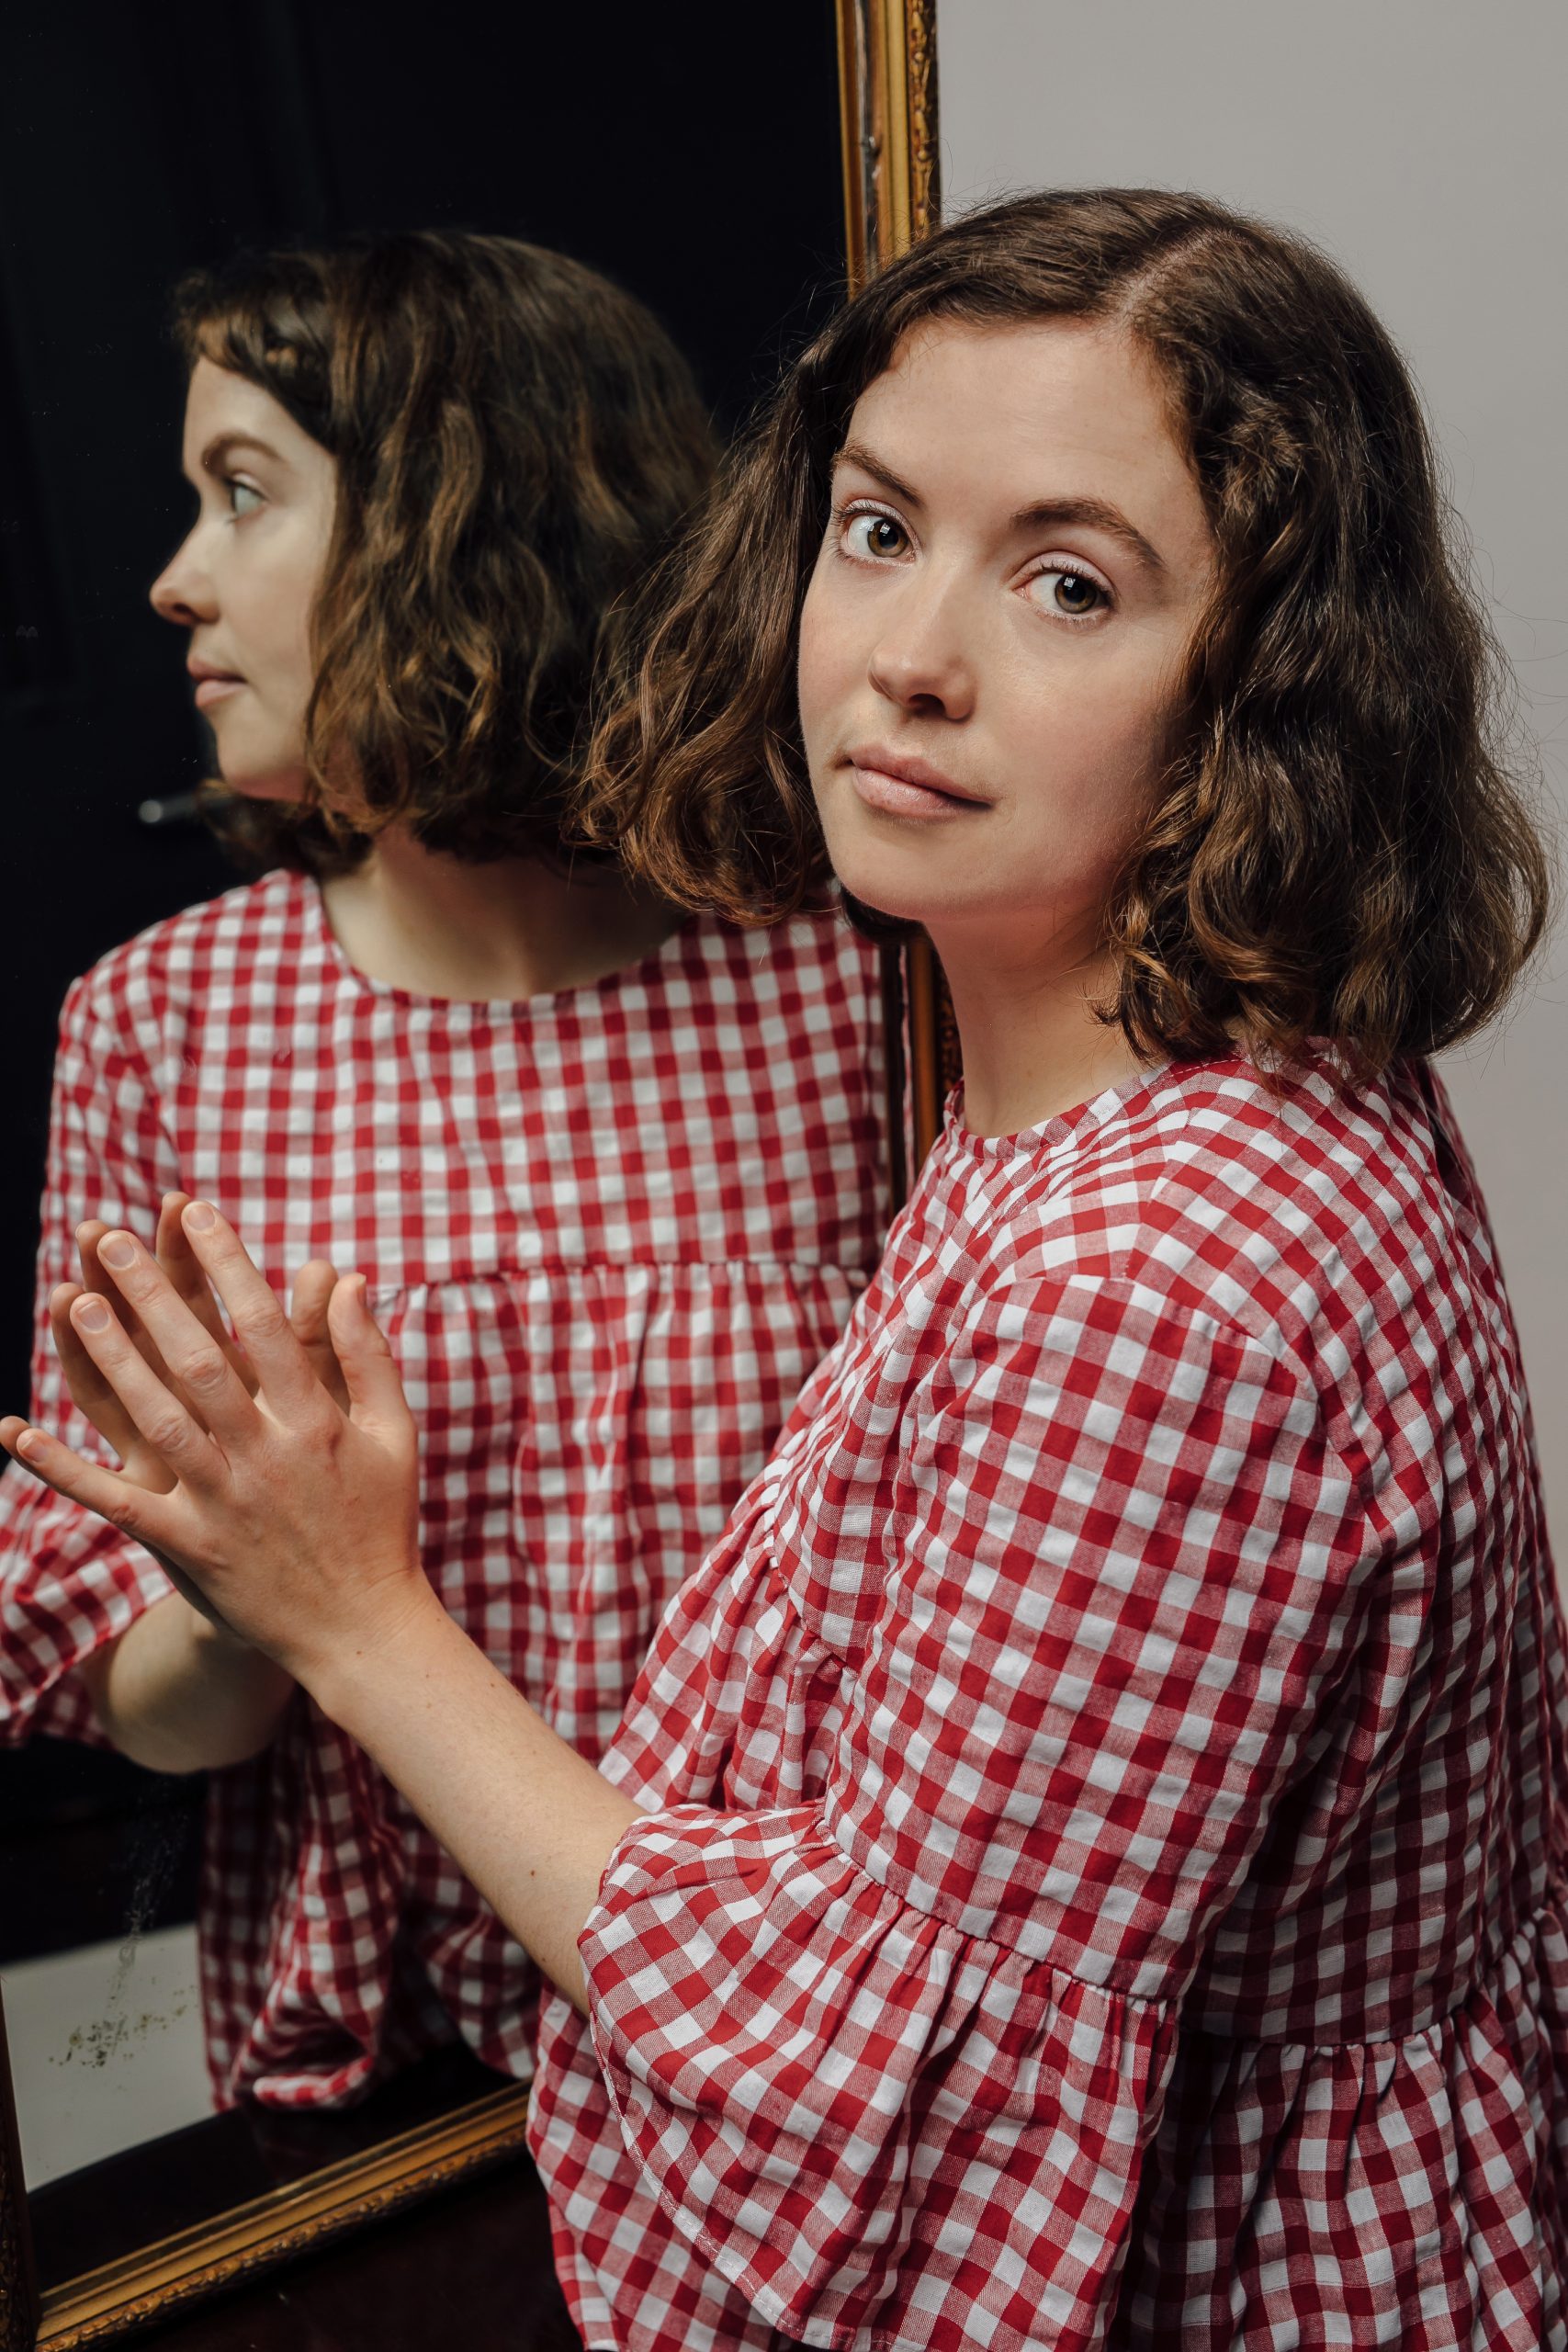 Clare as an adult reflected in a mirror wearing a red and white gingham top